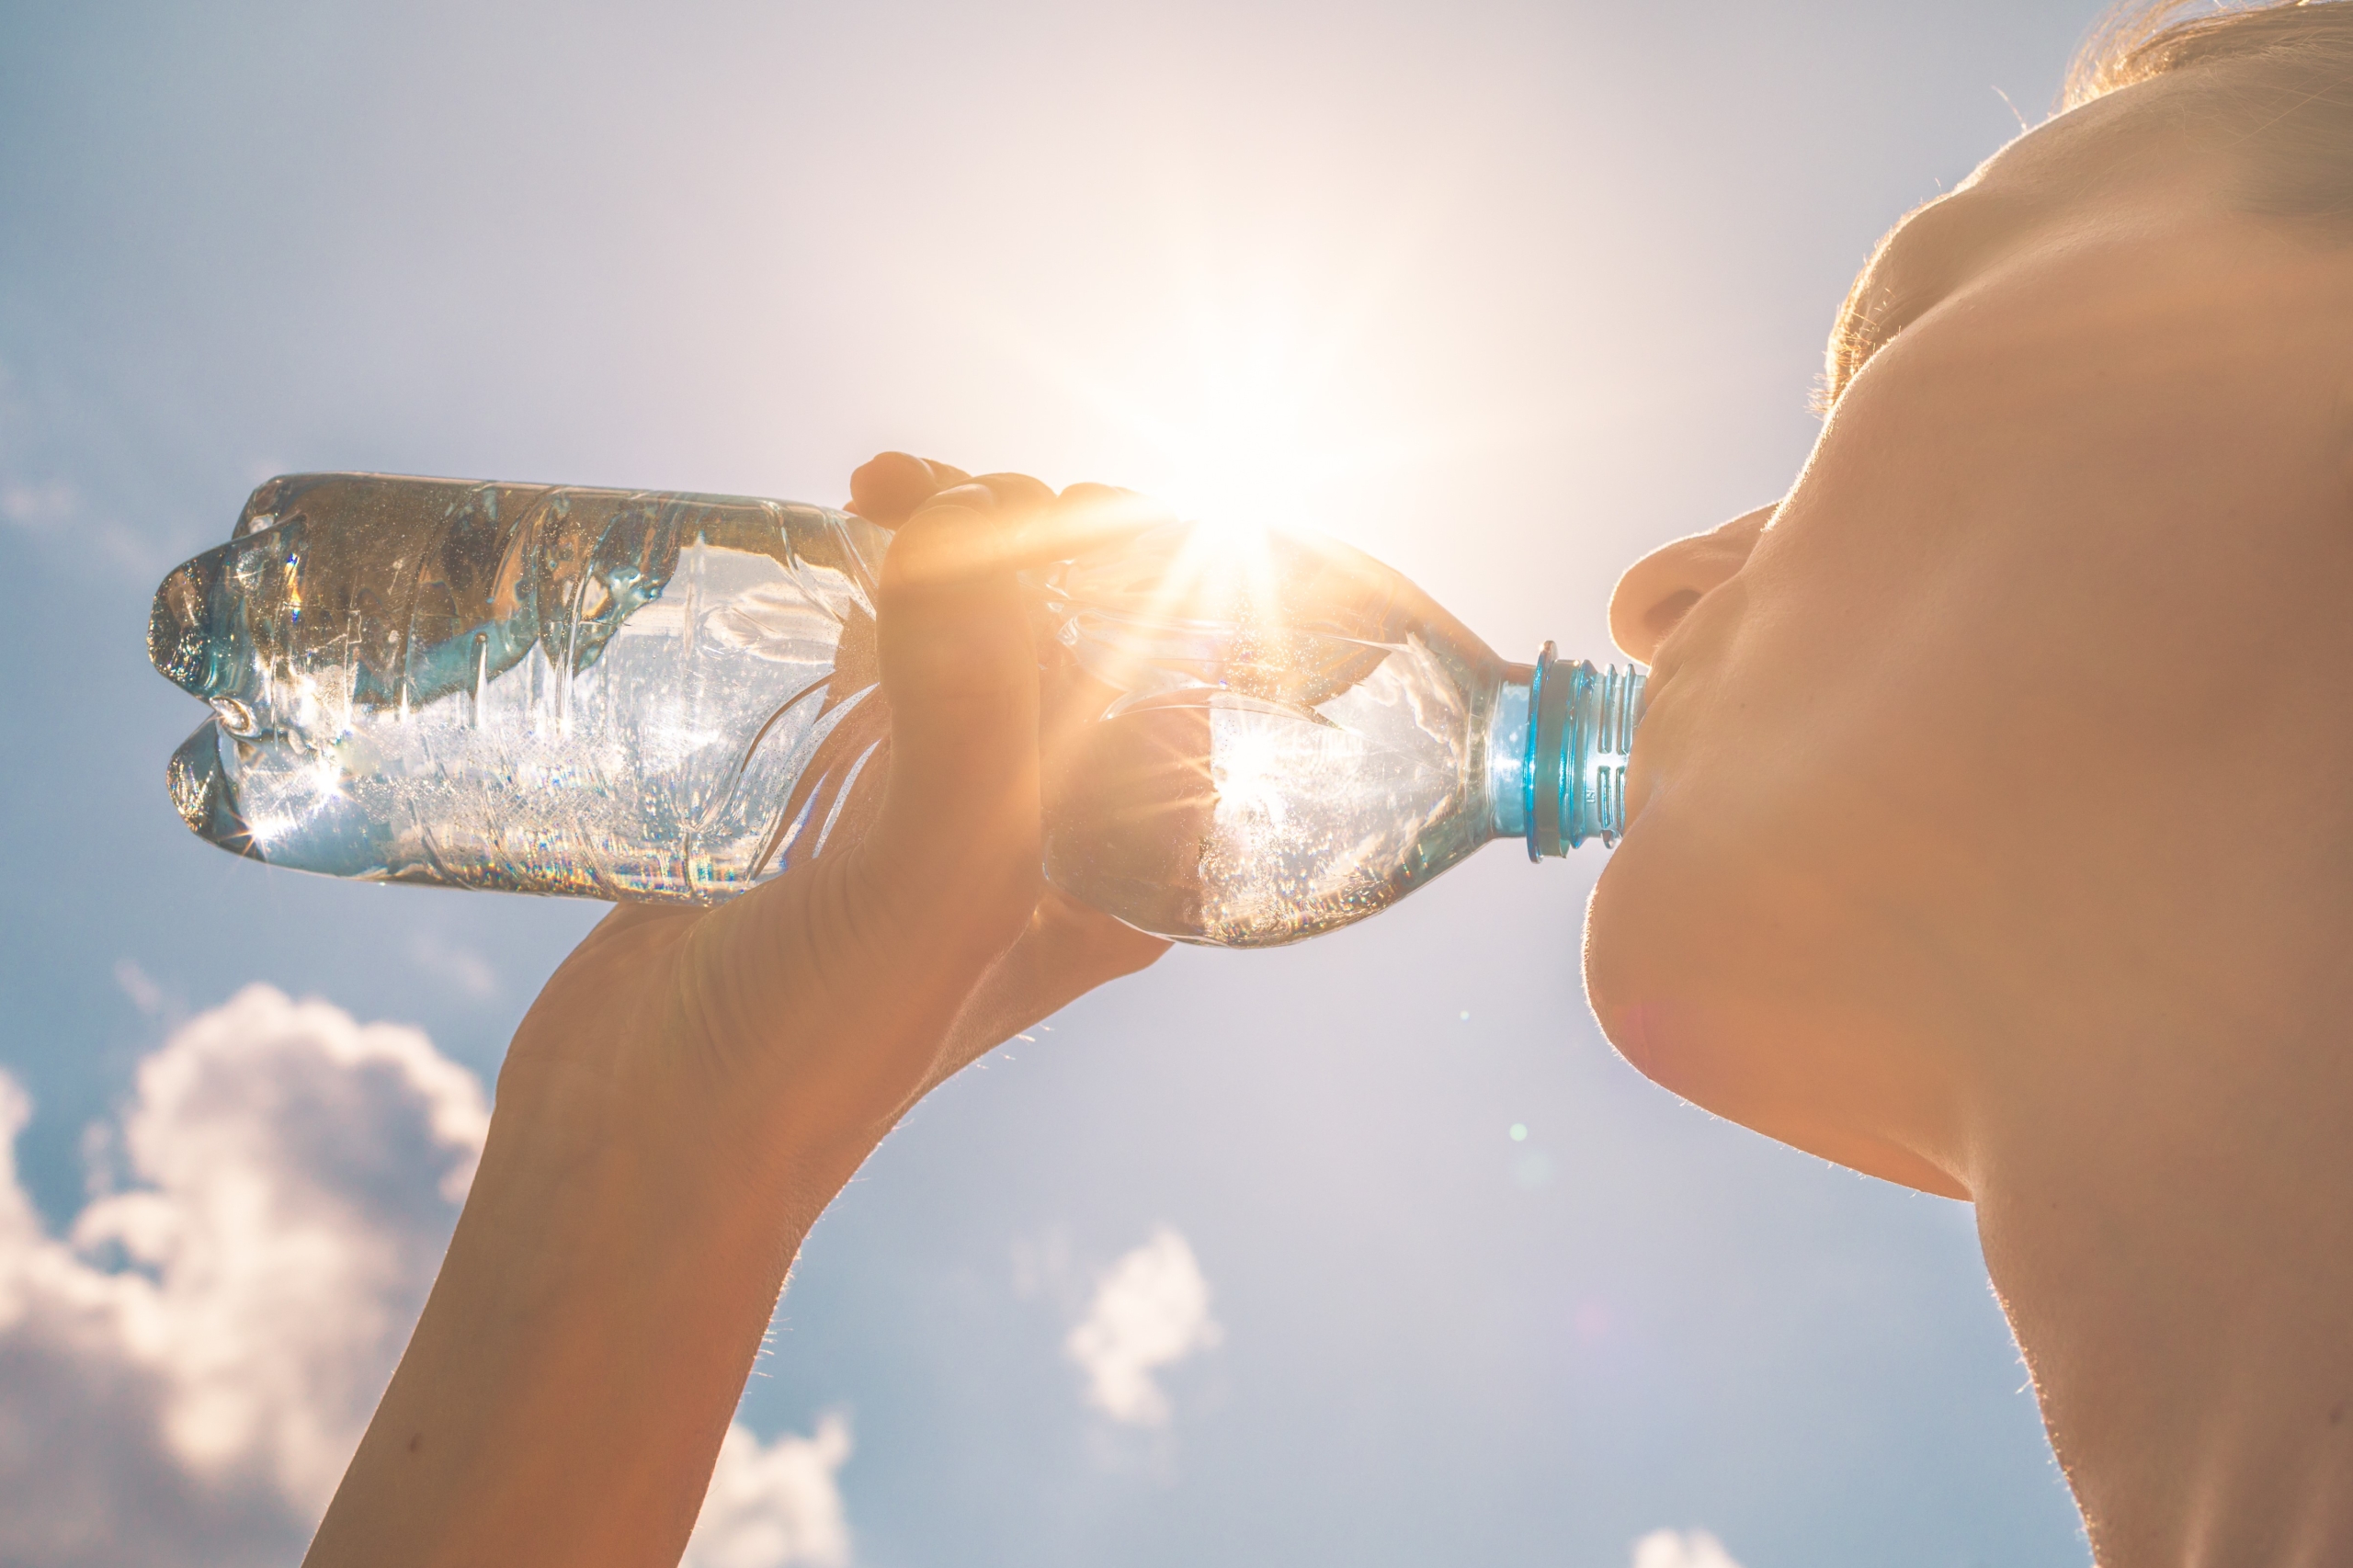 A person drinking water from a bottle against a sunny sky.